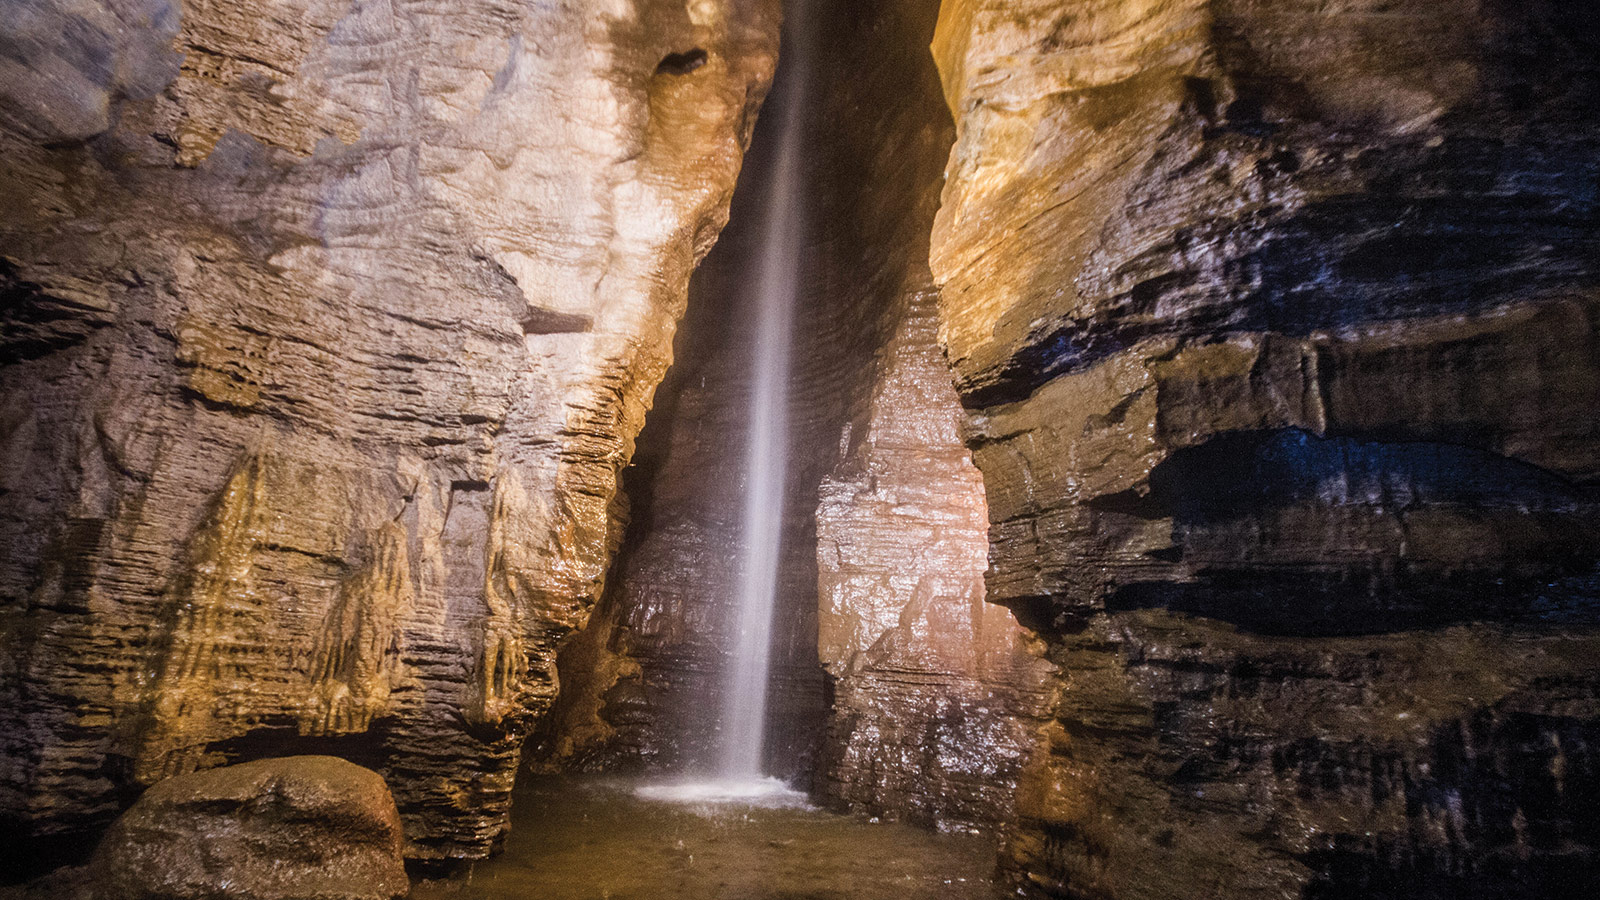 The 100-ft waterfall at the end of the guided tour of Secret Caverns New York was the highlight of our family trip to this show cave.